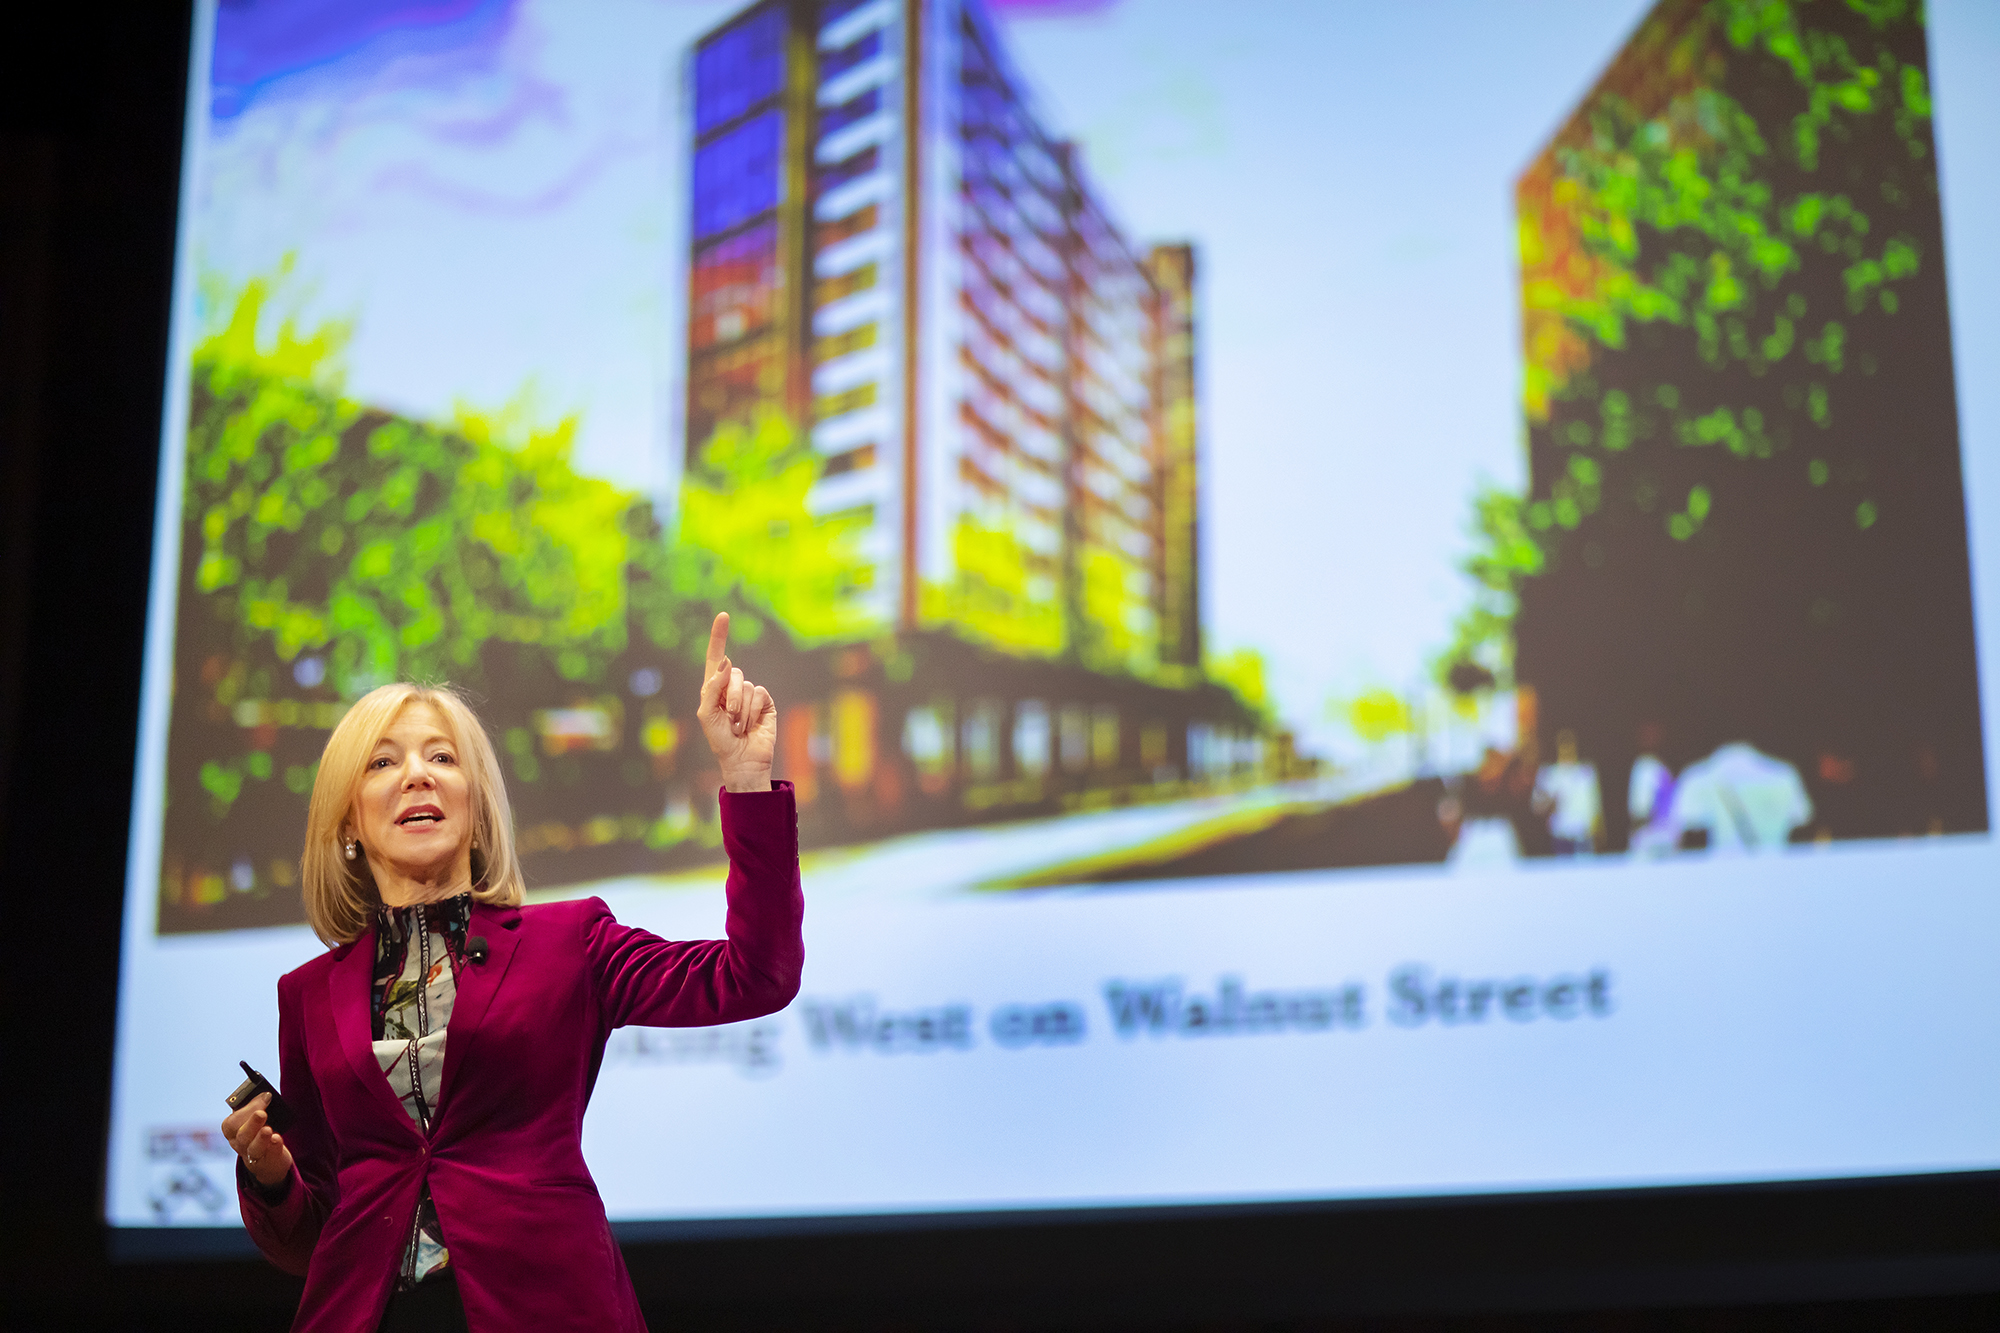 penn_president_amy_gutmann_speaks_to_parents_in_front_of_slideshow_presentation_at_family_weekend_2018